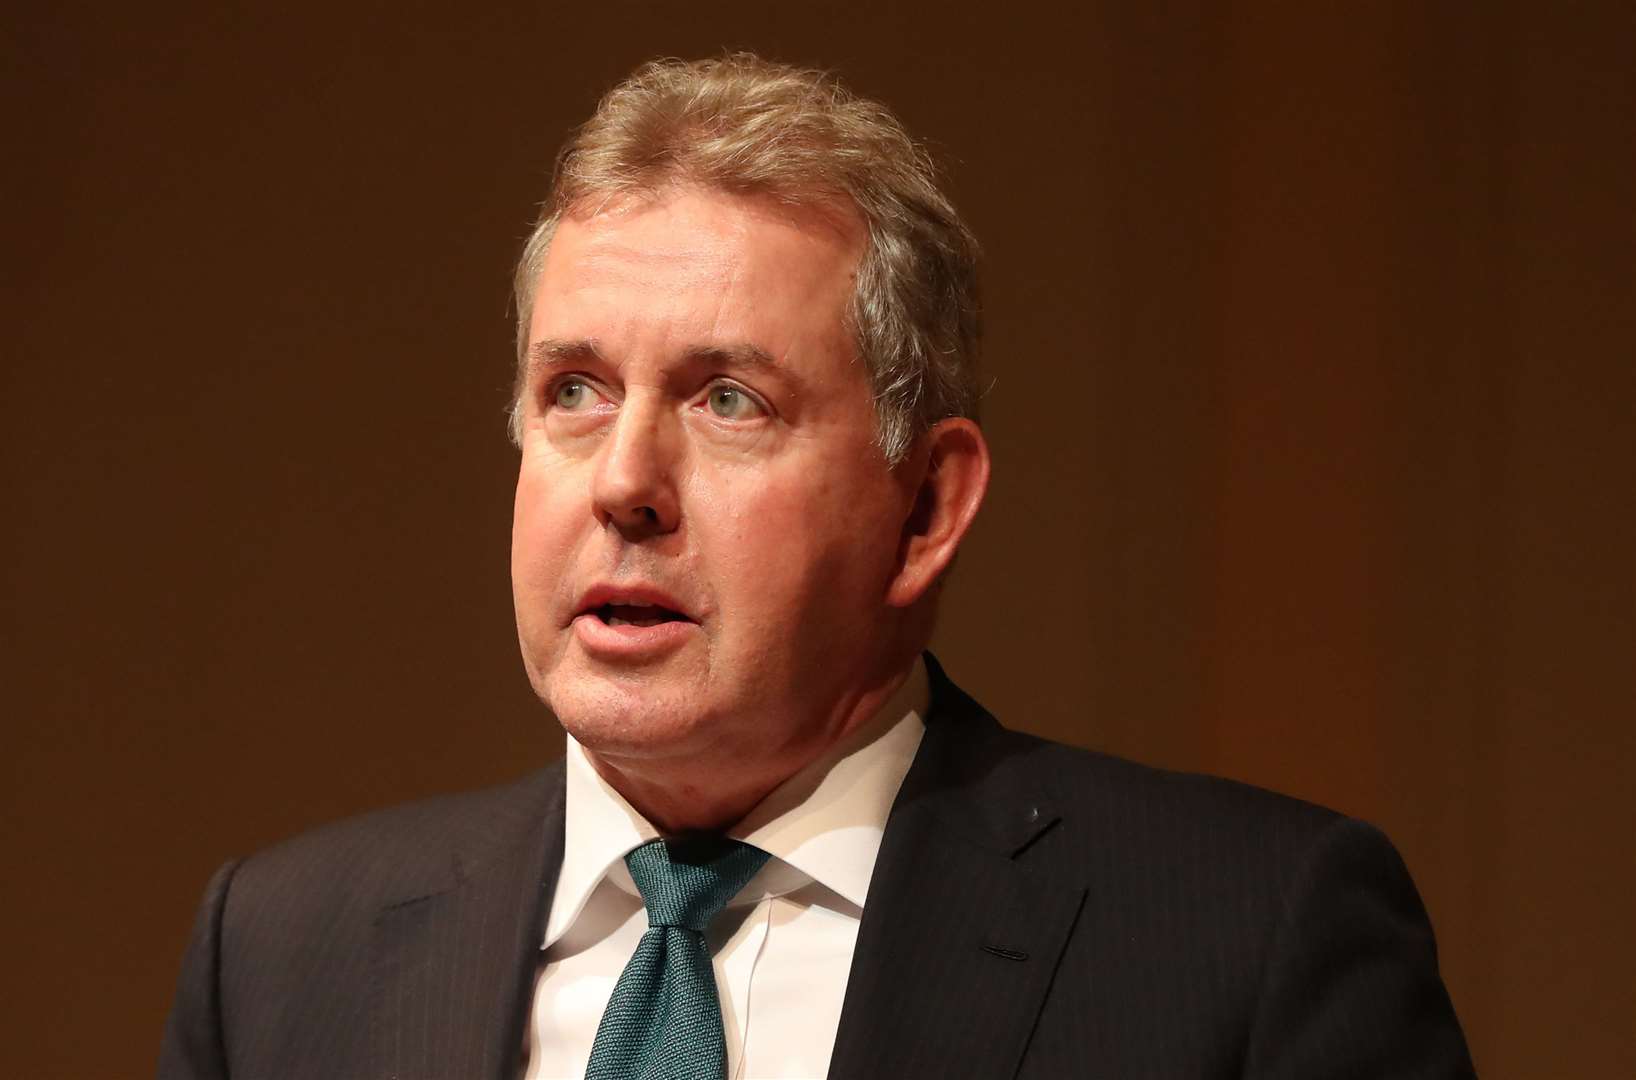 Lord Darroch, former UK ambassador to the US (Niall Carson/PA)